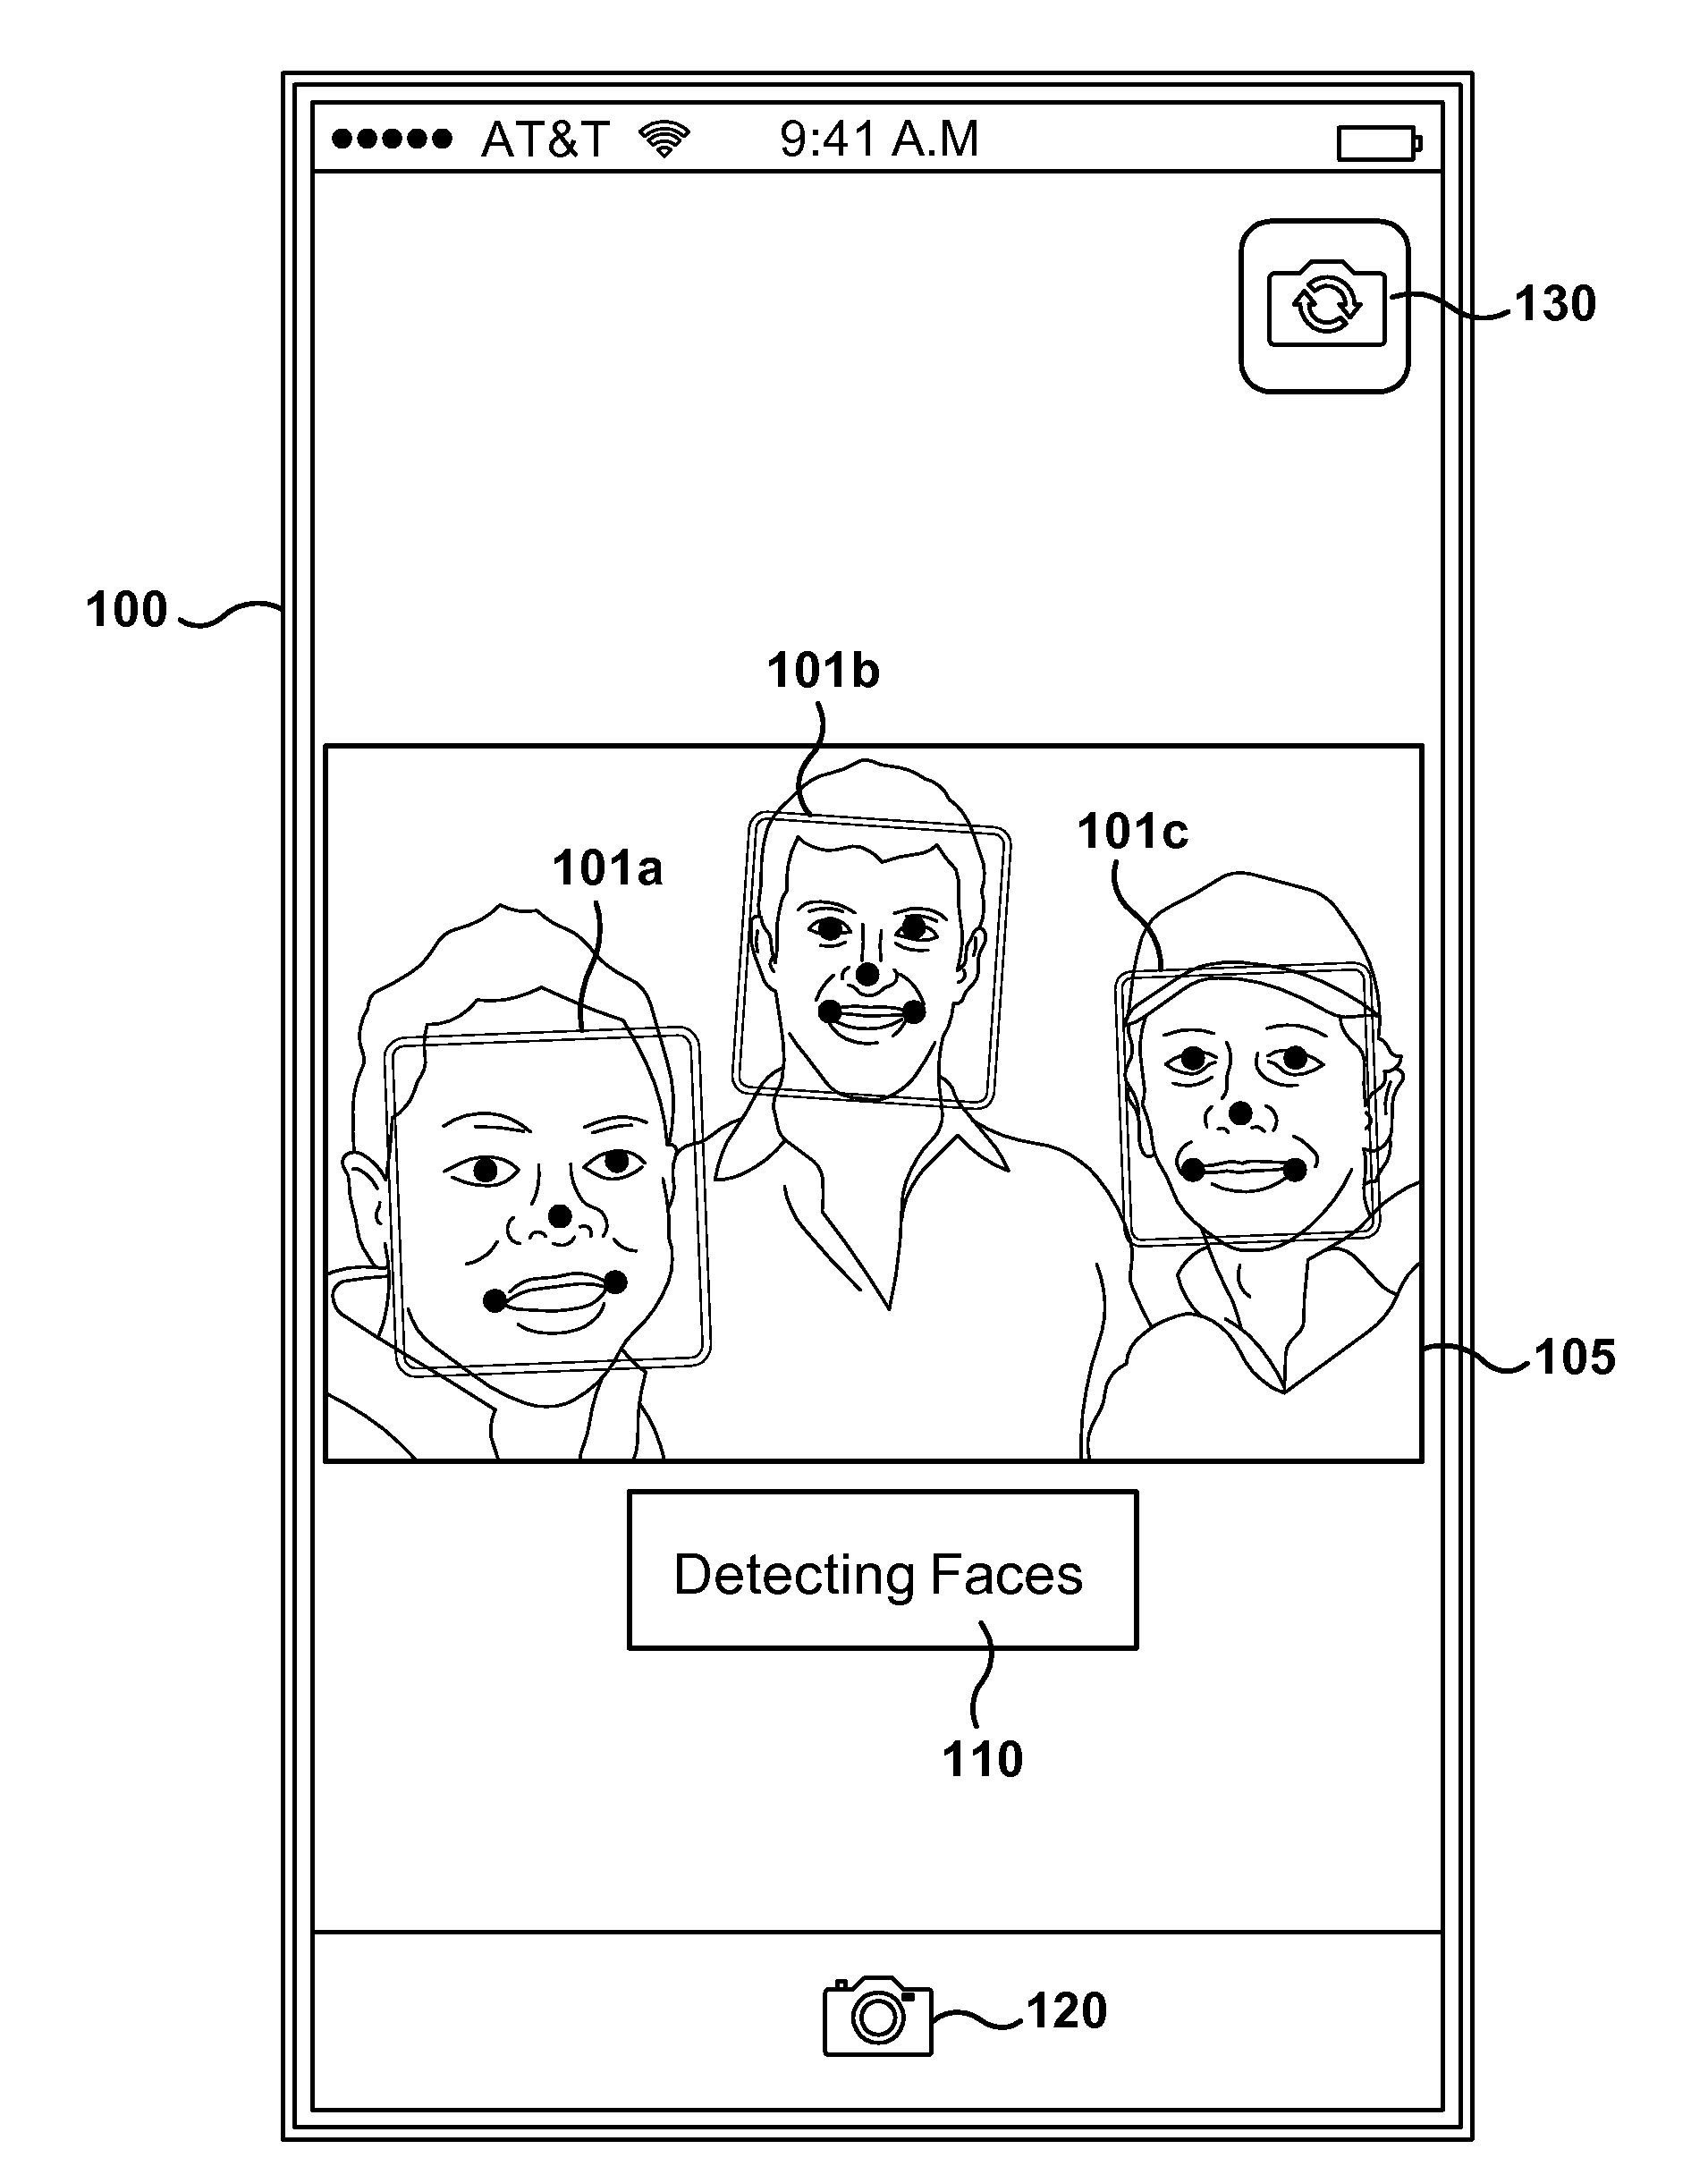 Automatic group formation and group detection through media recognition